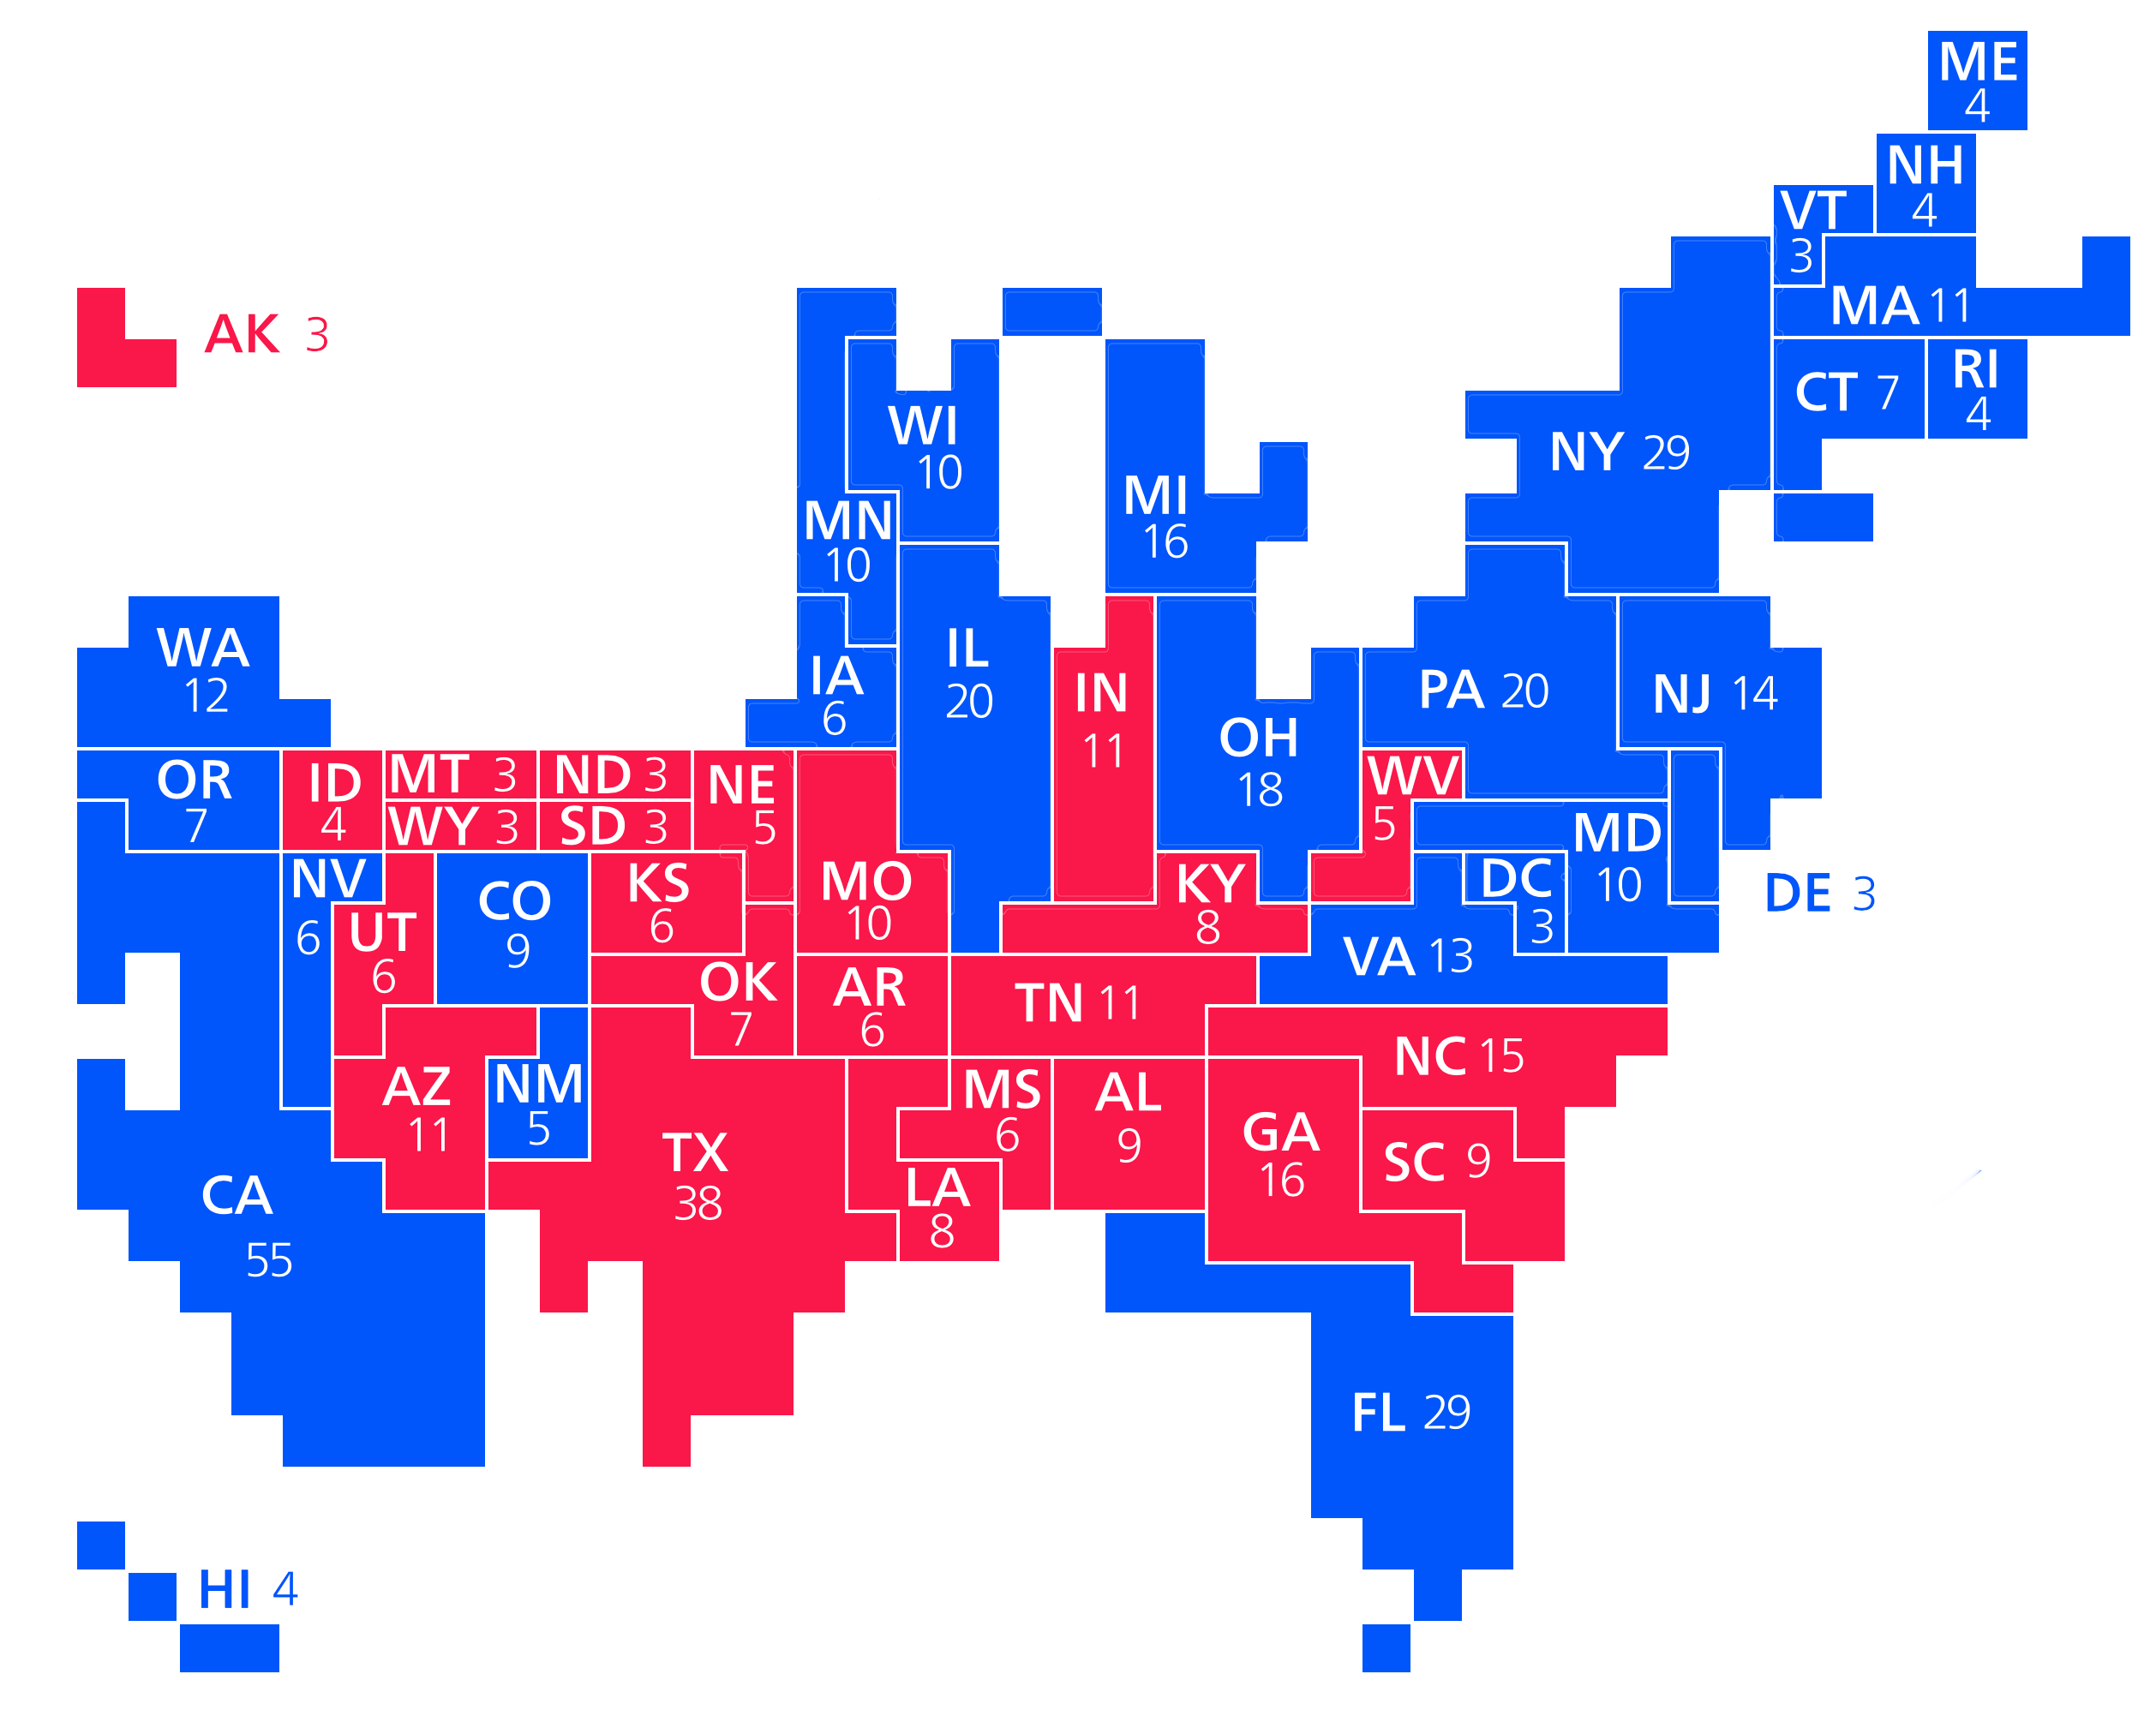 2012 US election results maps of different kinds.